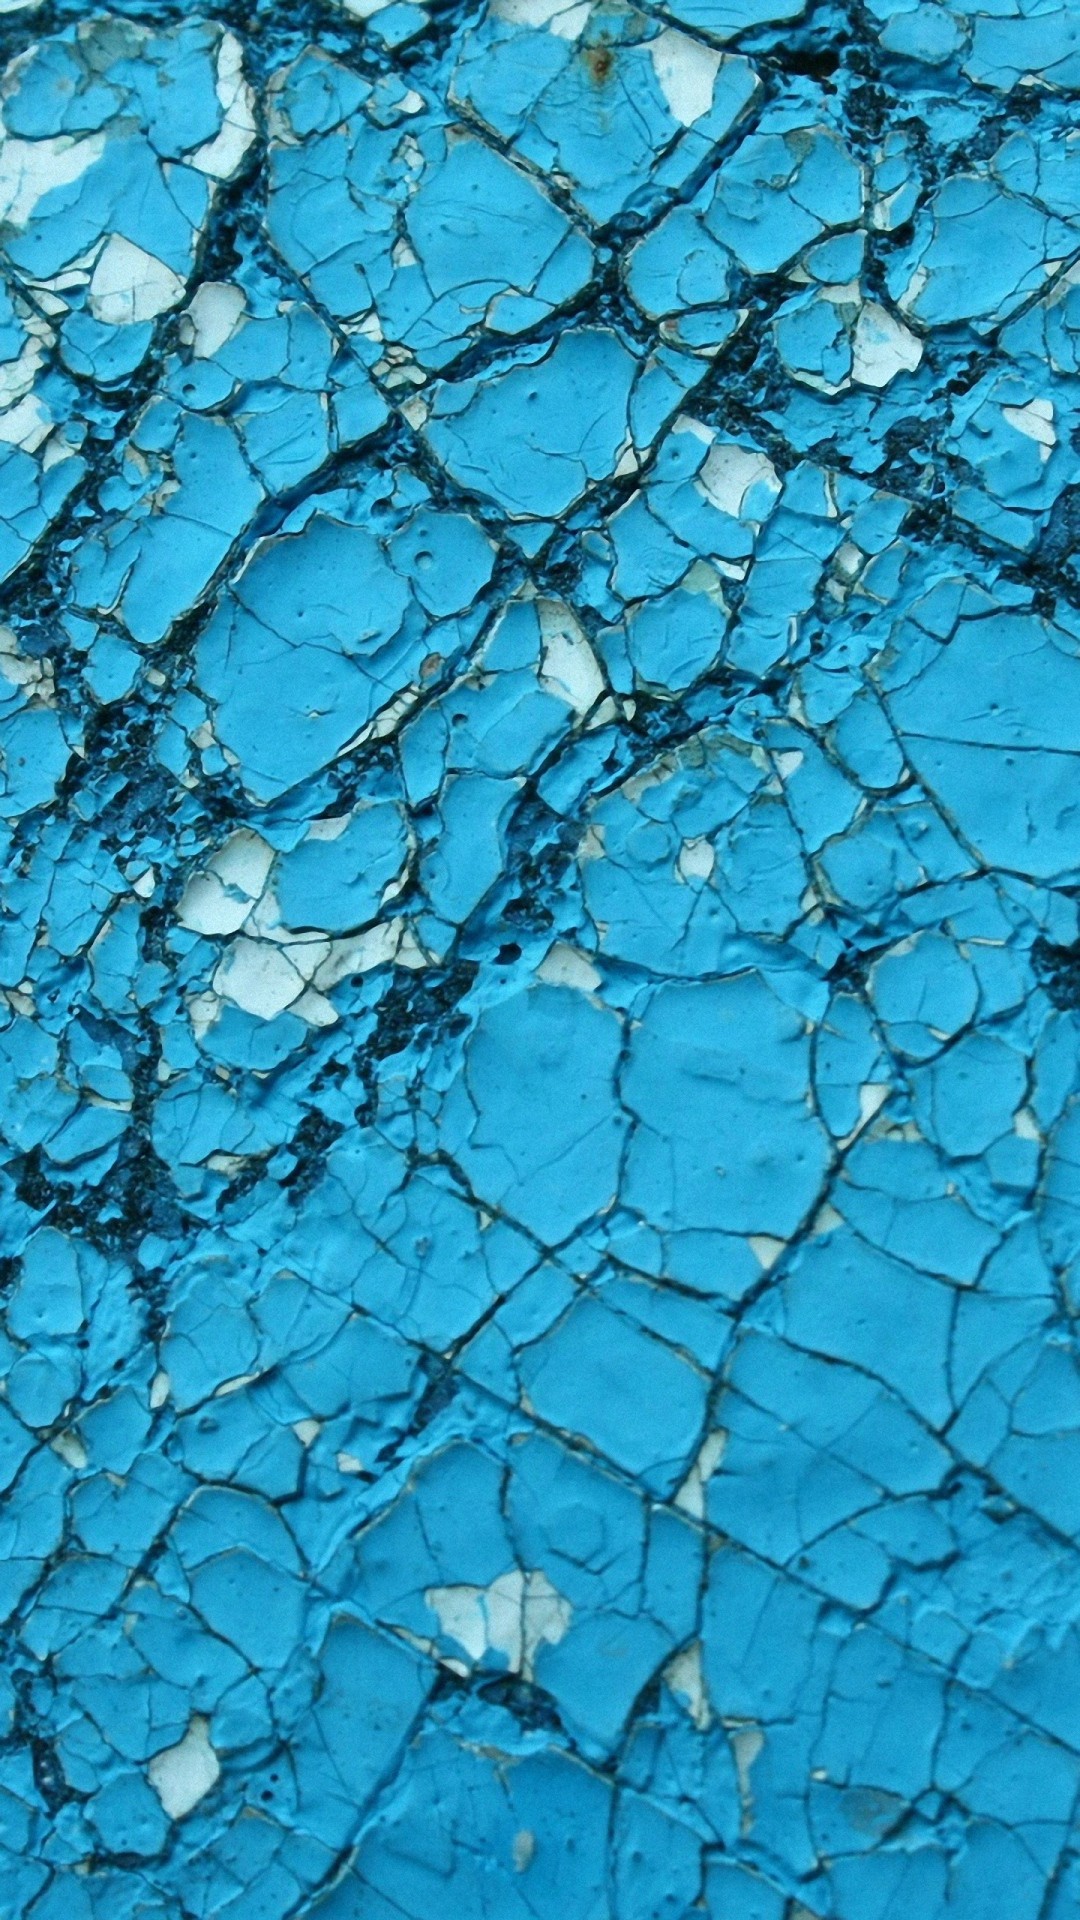 Cracked Screen Wallpaper For Android Free Download - Hd Iphone Wallpapers  Texture - 1080x1920 Wallpaper 